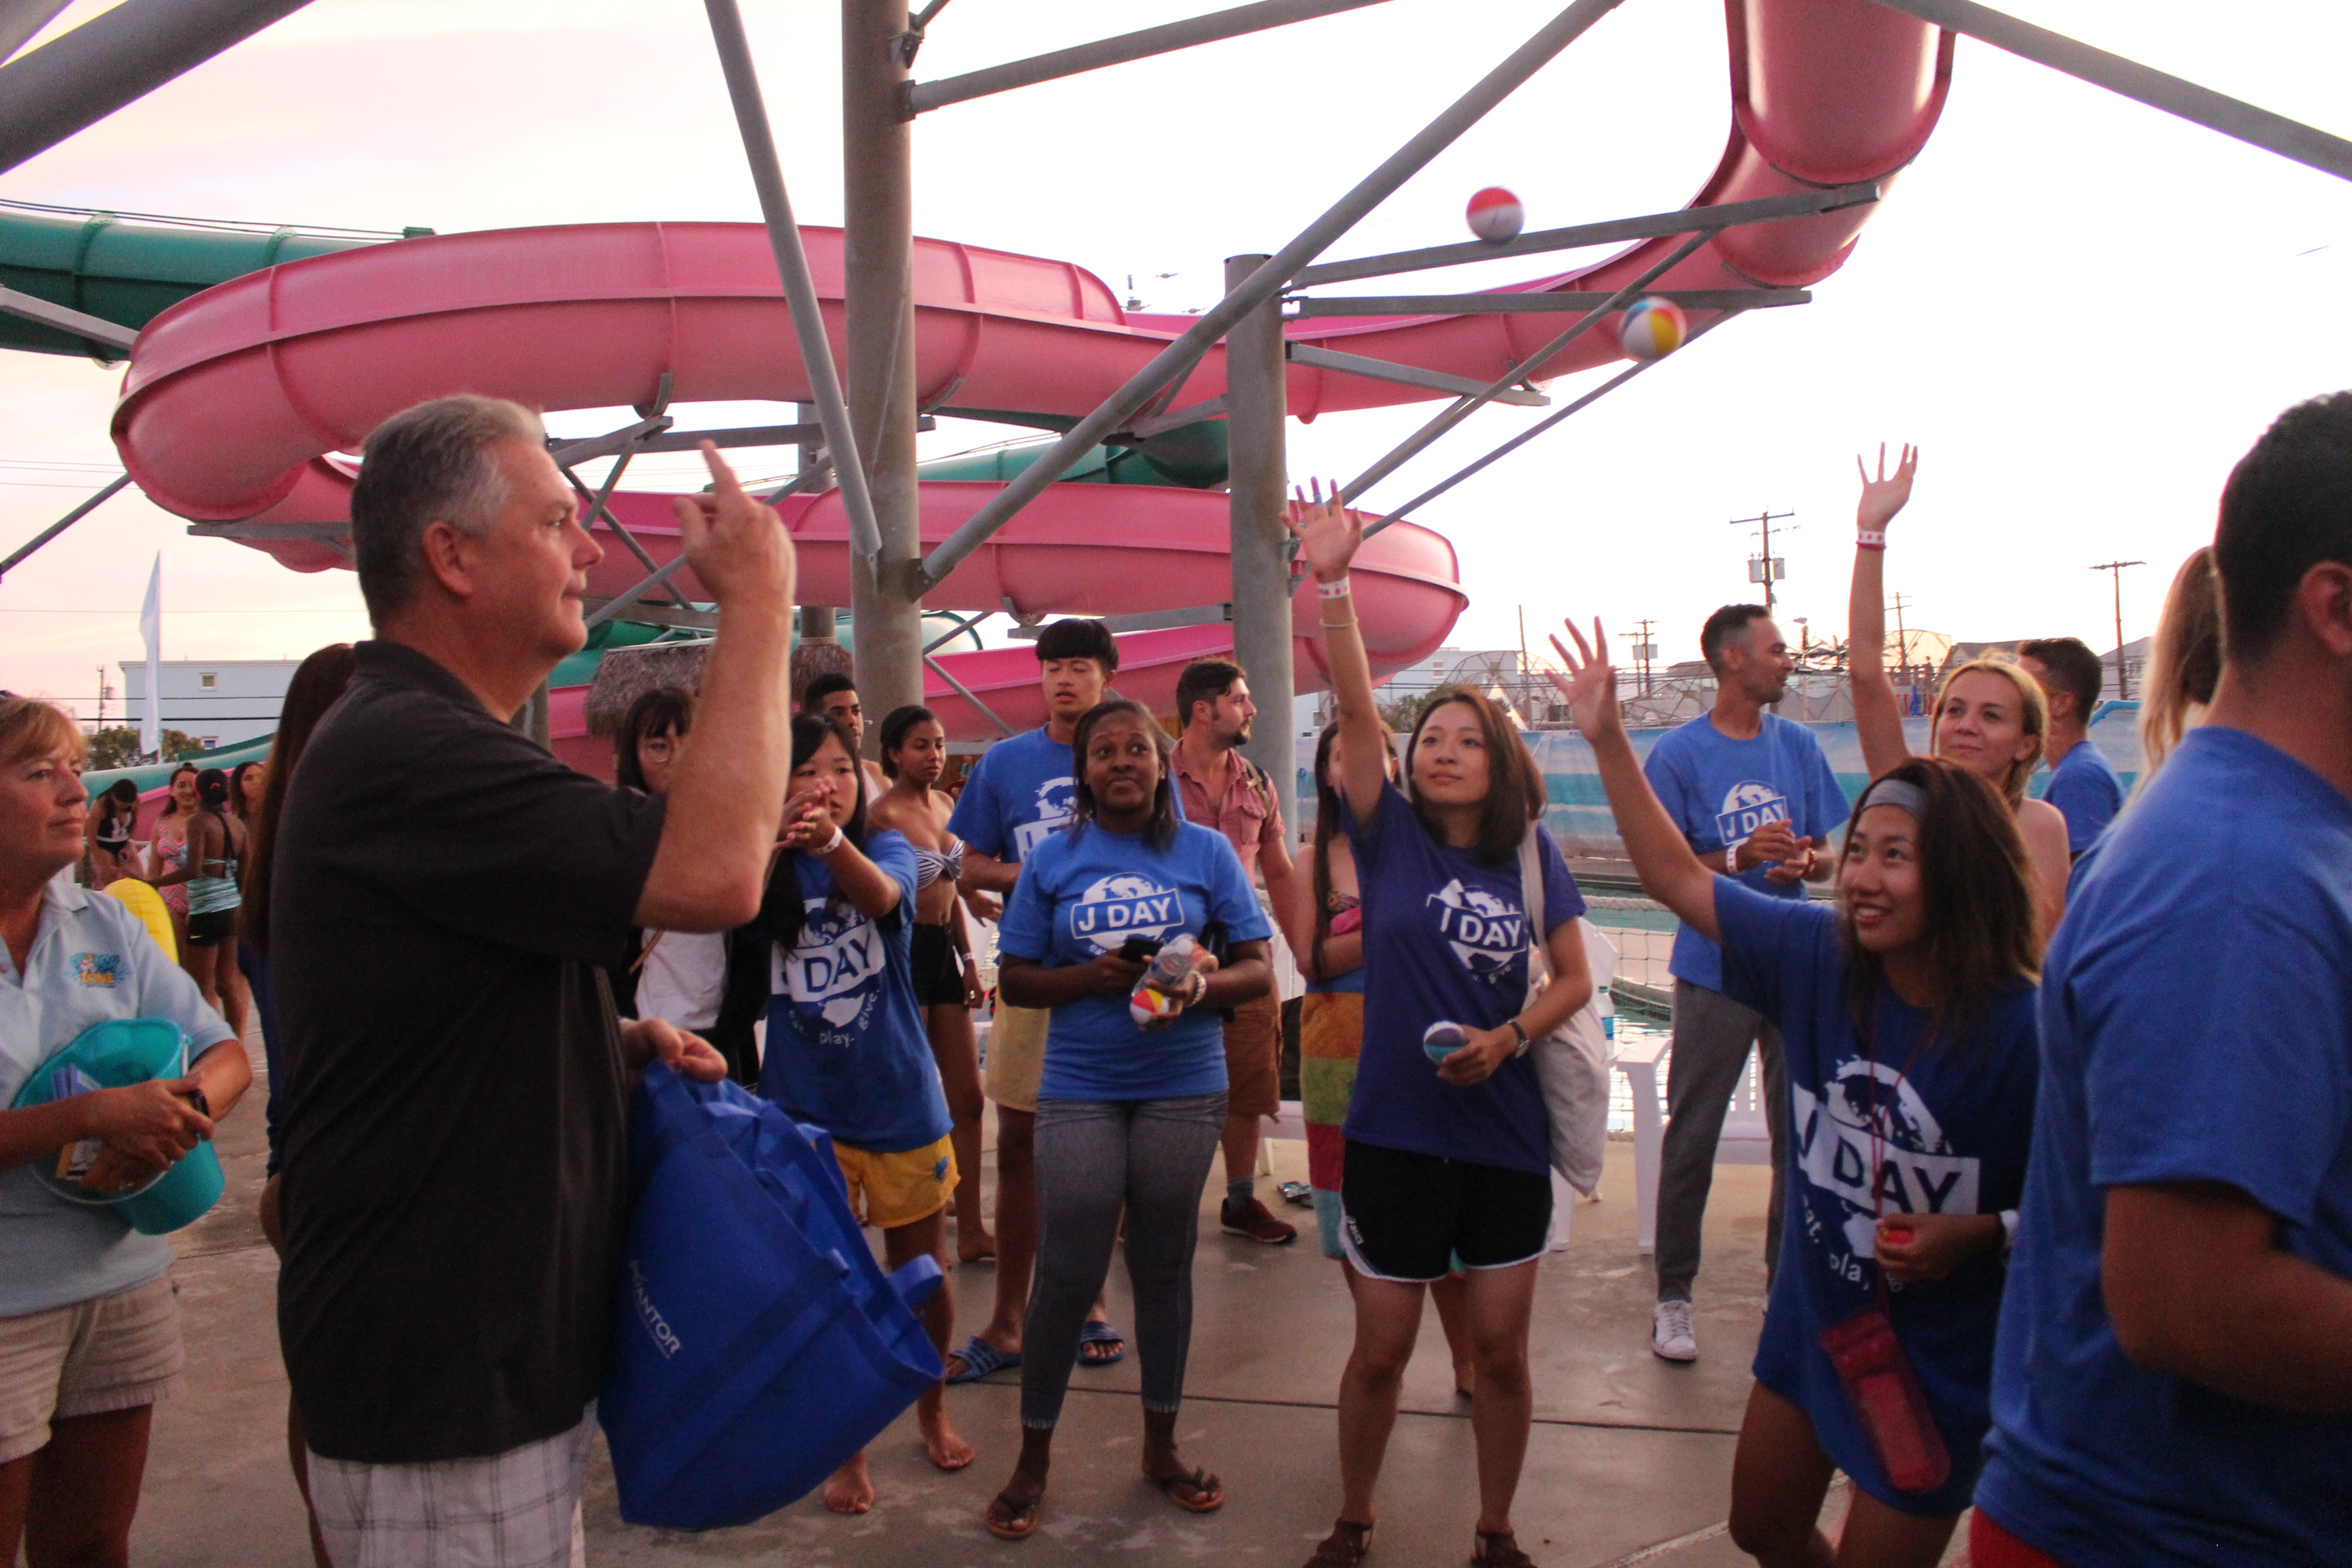 John Lynch throws beach balls that students who catch them can trade for prizes during J-Day at Splash Zone Waterpark.